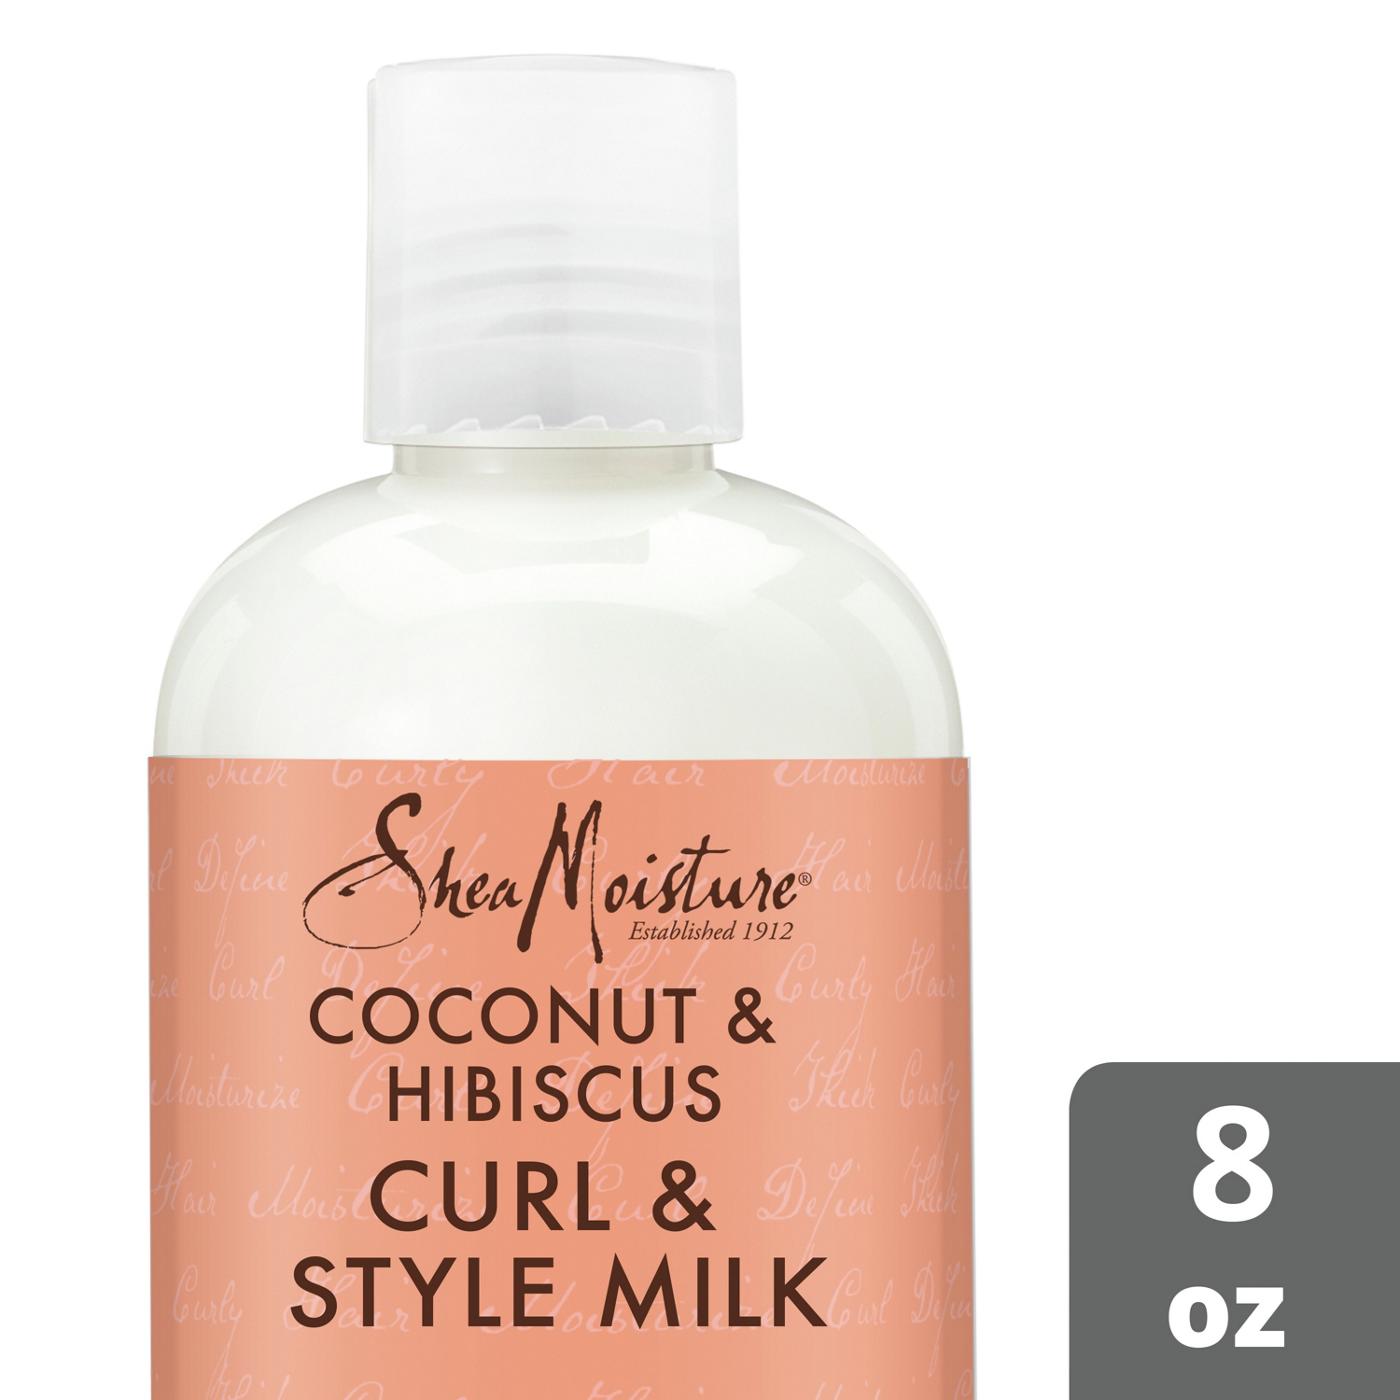 SheaMoisture Coconut & Hibiscus Curl & Style Milk; image 3 of 6